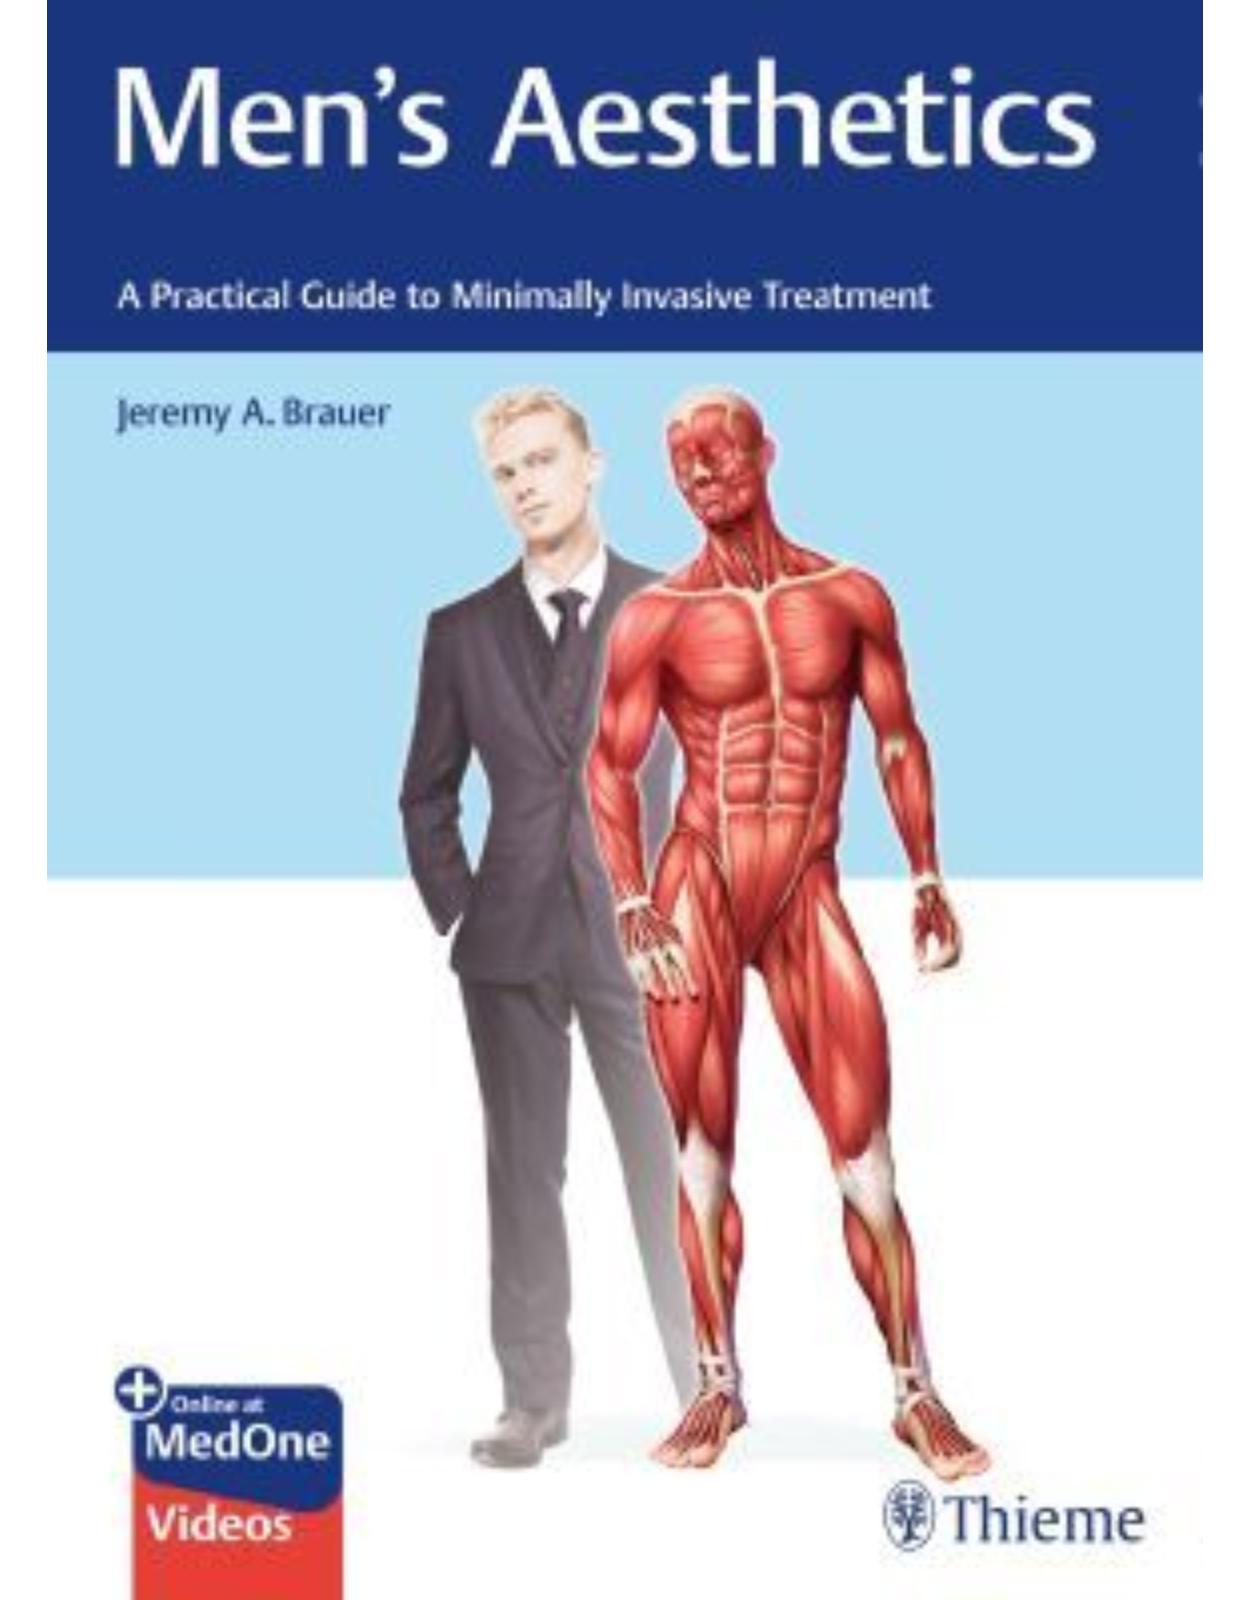 Men`s Aesthetics – A Practical Guide to Minimally Invasive Treatment